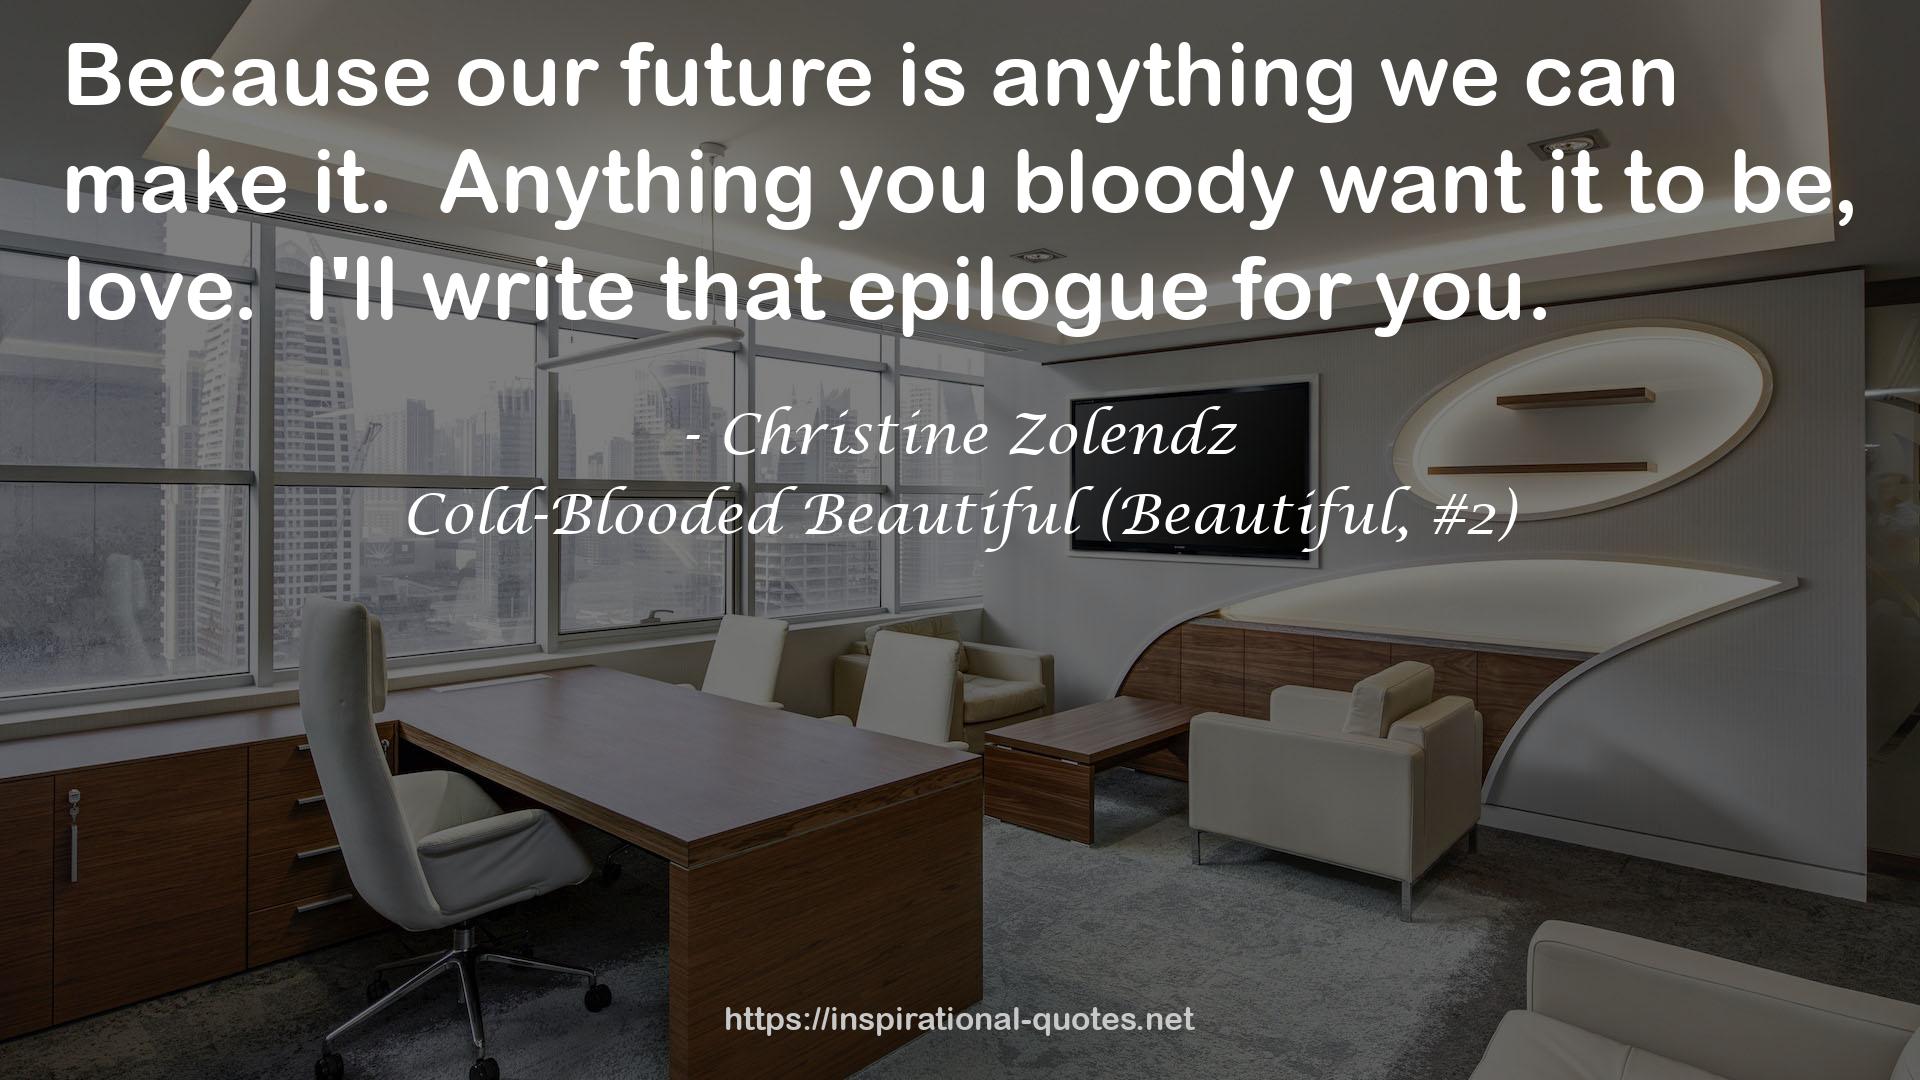 Cold-Blooded Beautiful (Beautiful, #2) QUOTES